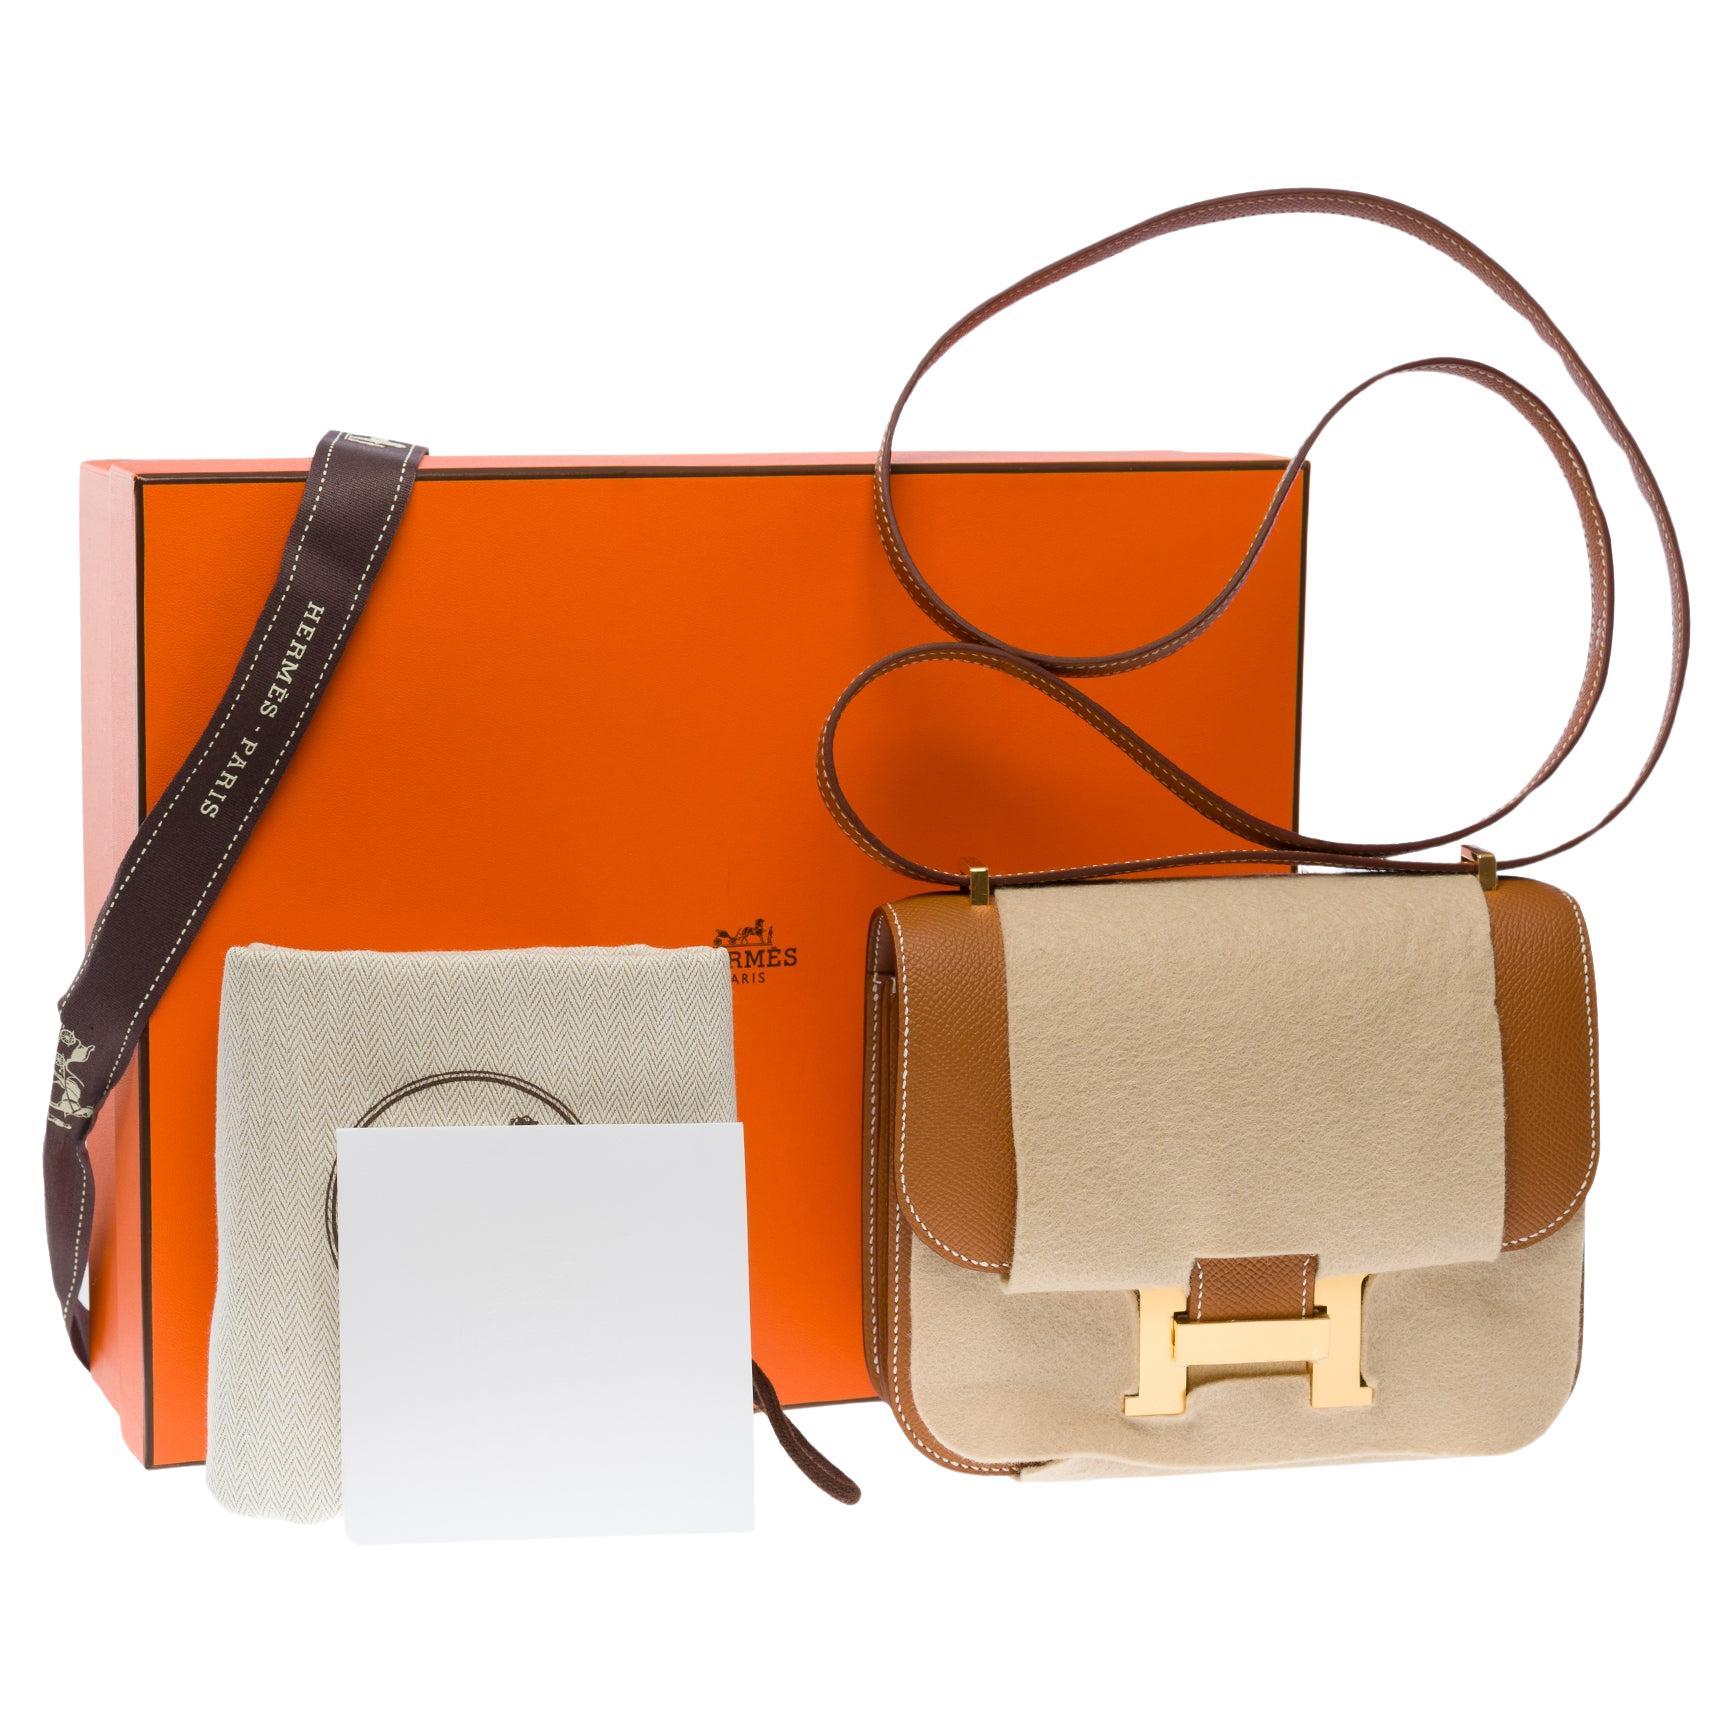 New Hermès Constance Mini 18 Mirror shoulder bag in Gold Epsom calf leather, GHW For Sale